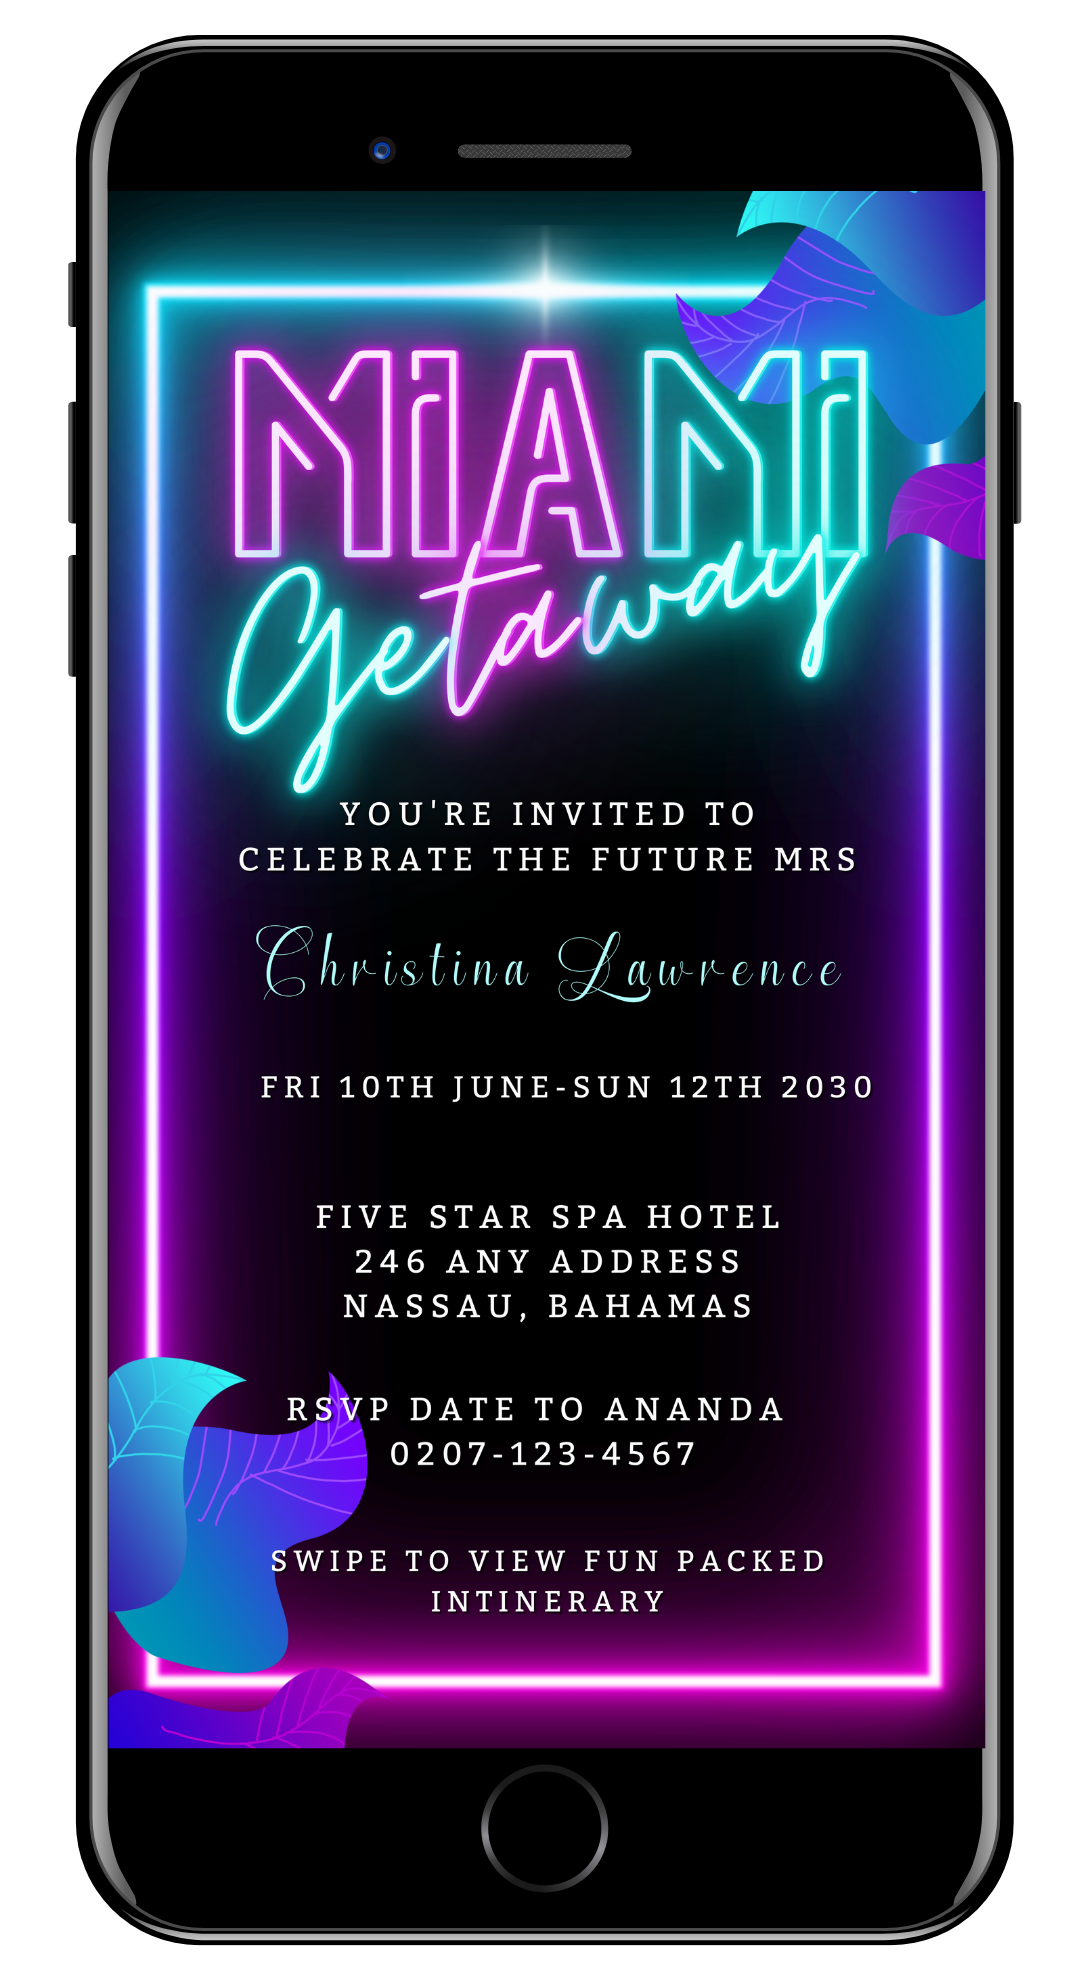 Miami Teal Pink Neon Getaway Party Evite displayed on phone screen, featuring customizable neon text and graphics, editable via Canva for easy event personalization.